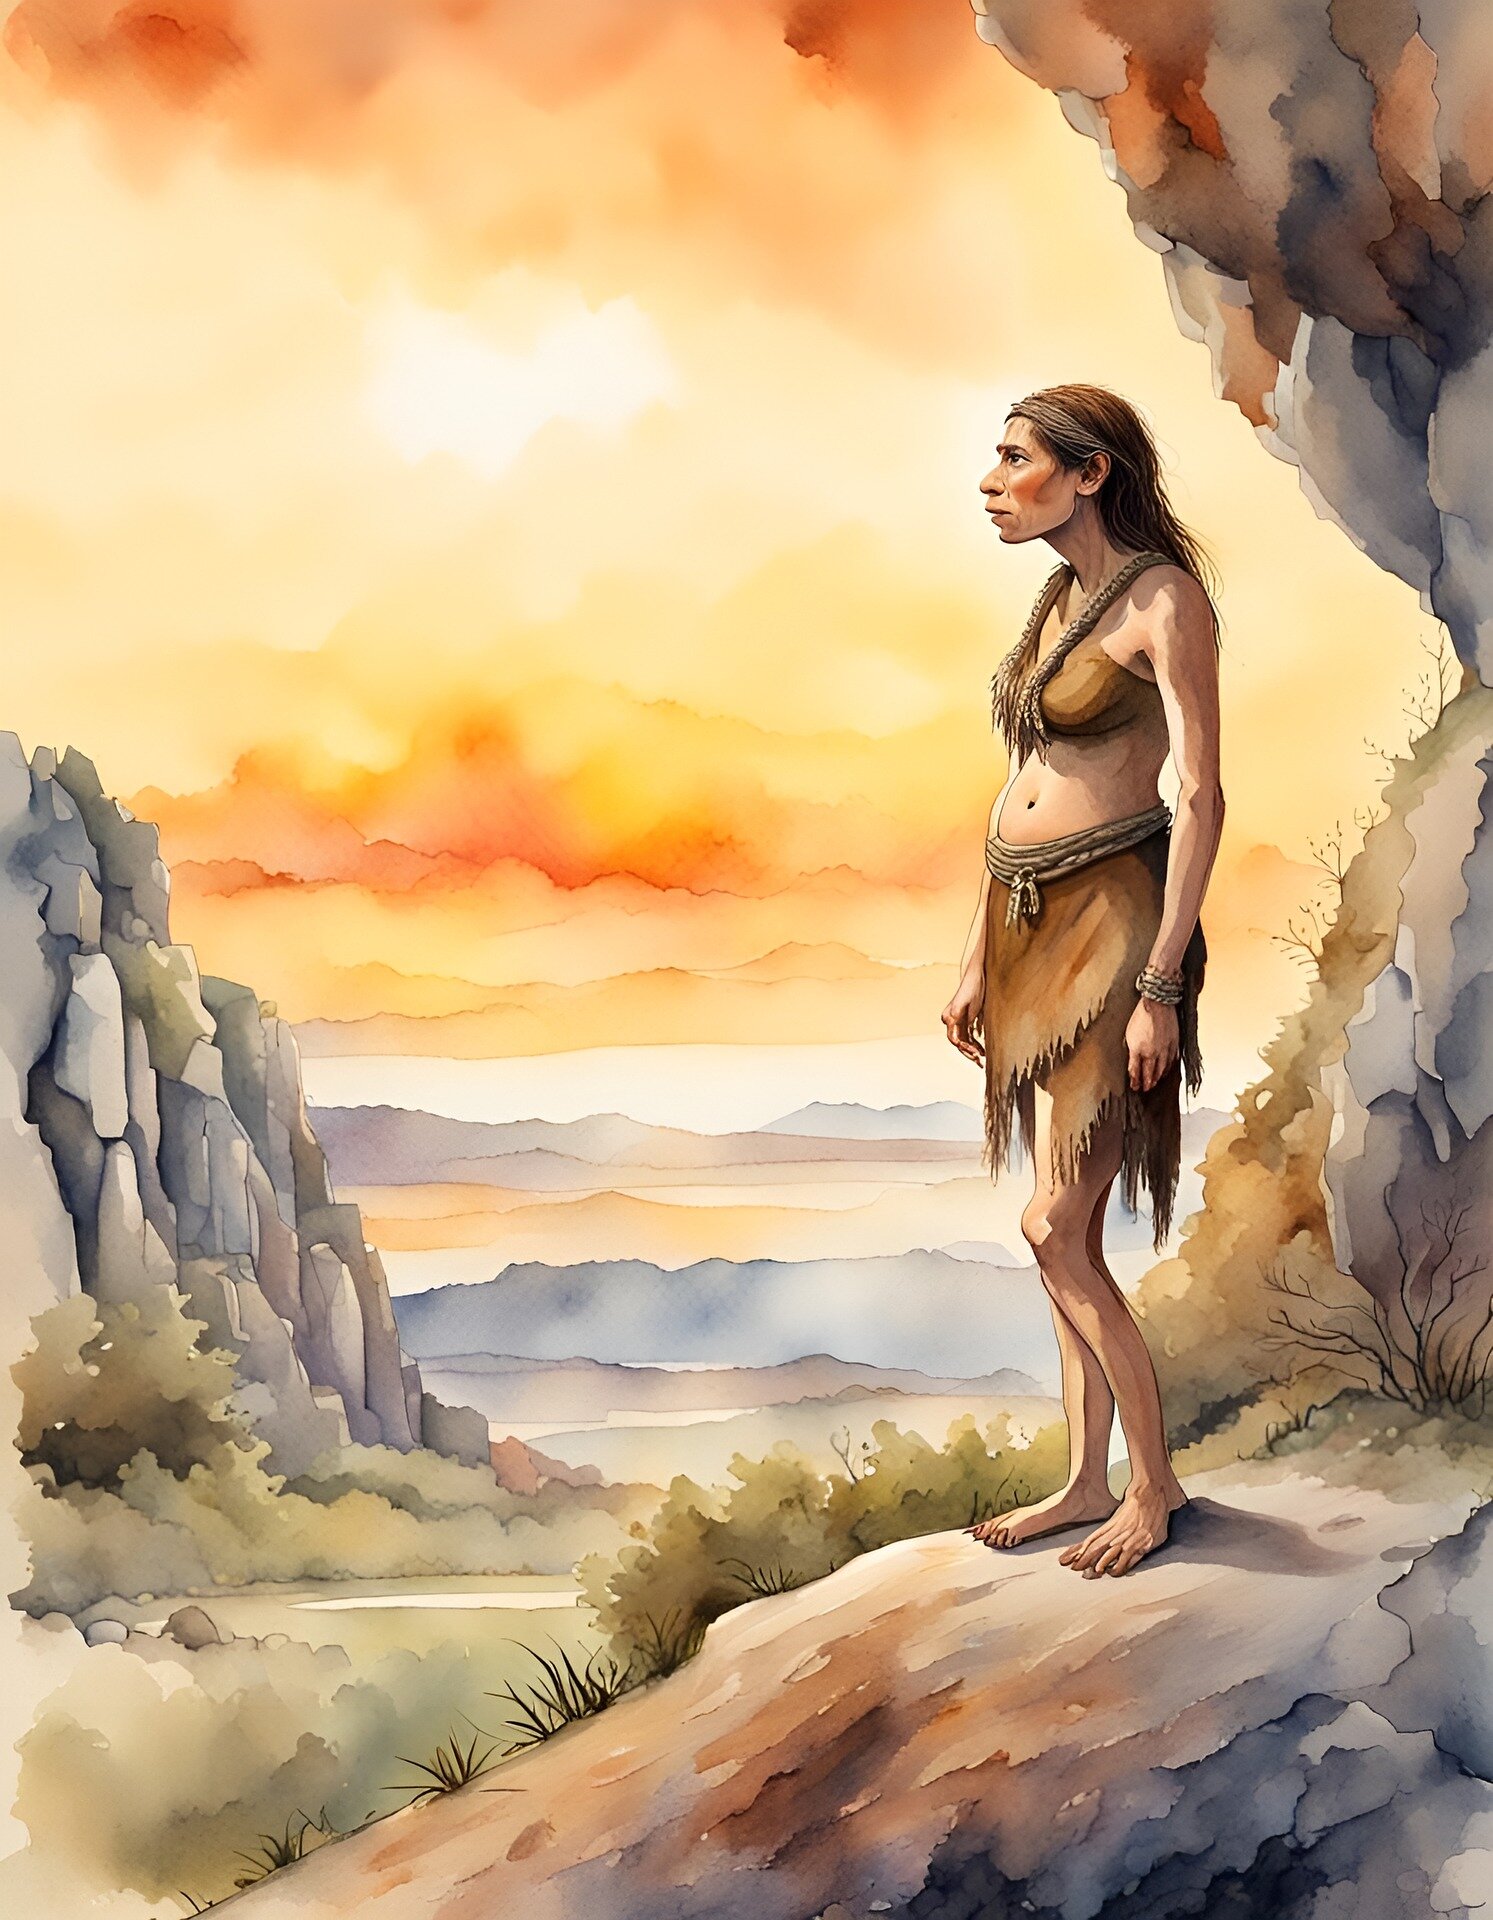 A new study says Neanderthals may have been morning people